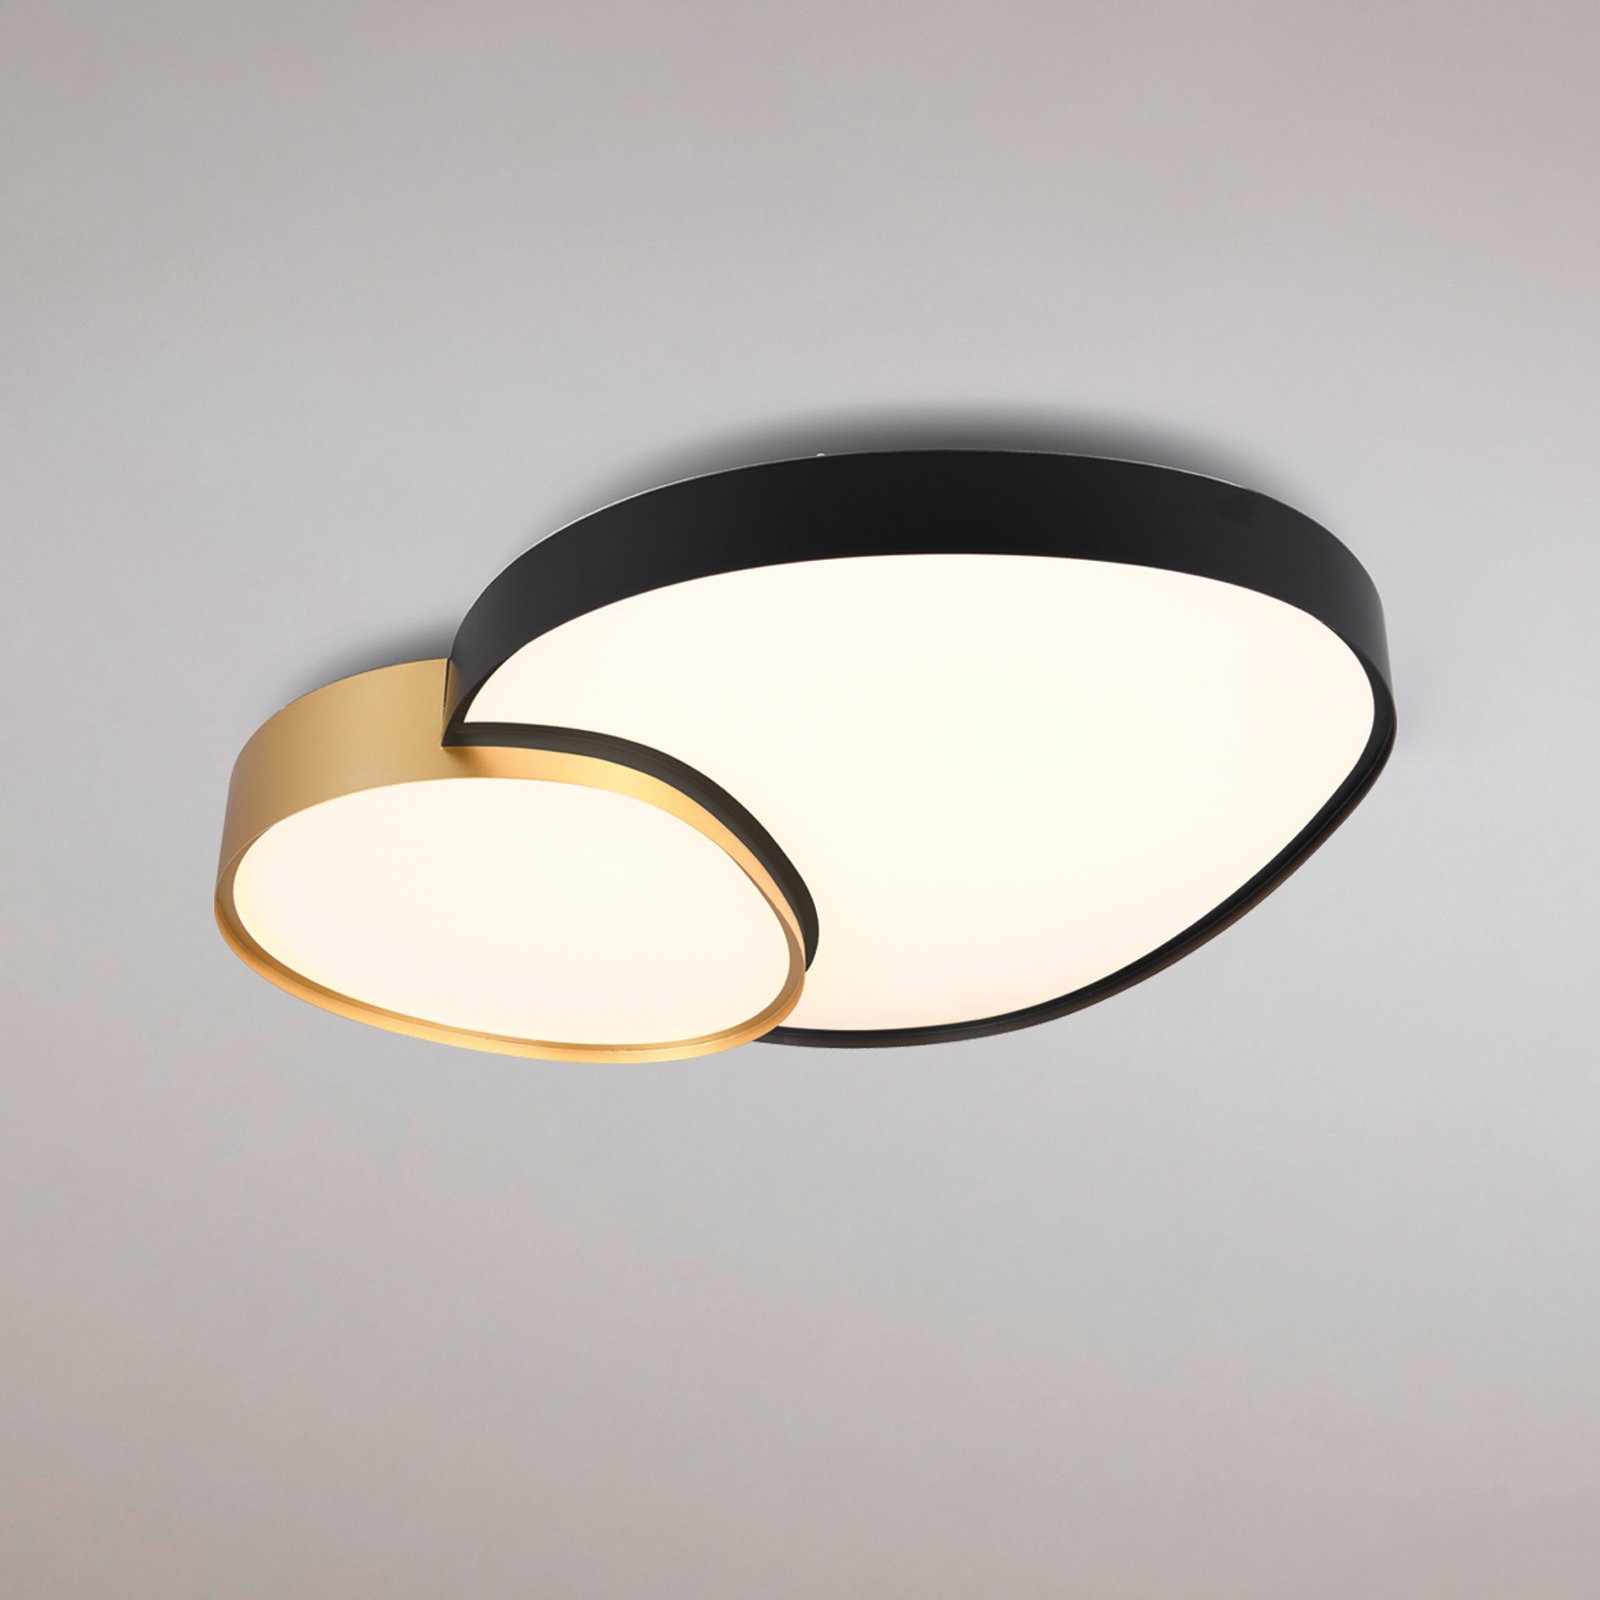 LED ceiling lamp Rise, black-gold, 77 x 63 cm, CCT, dimmable